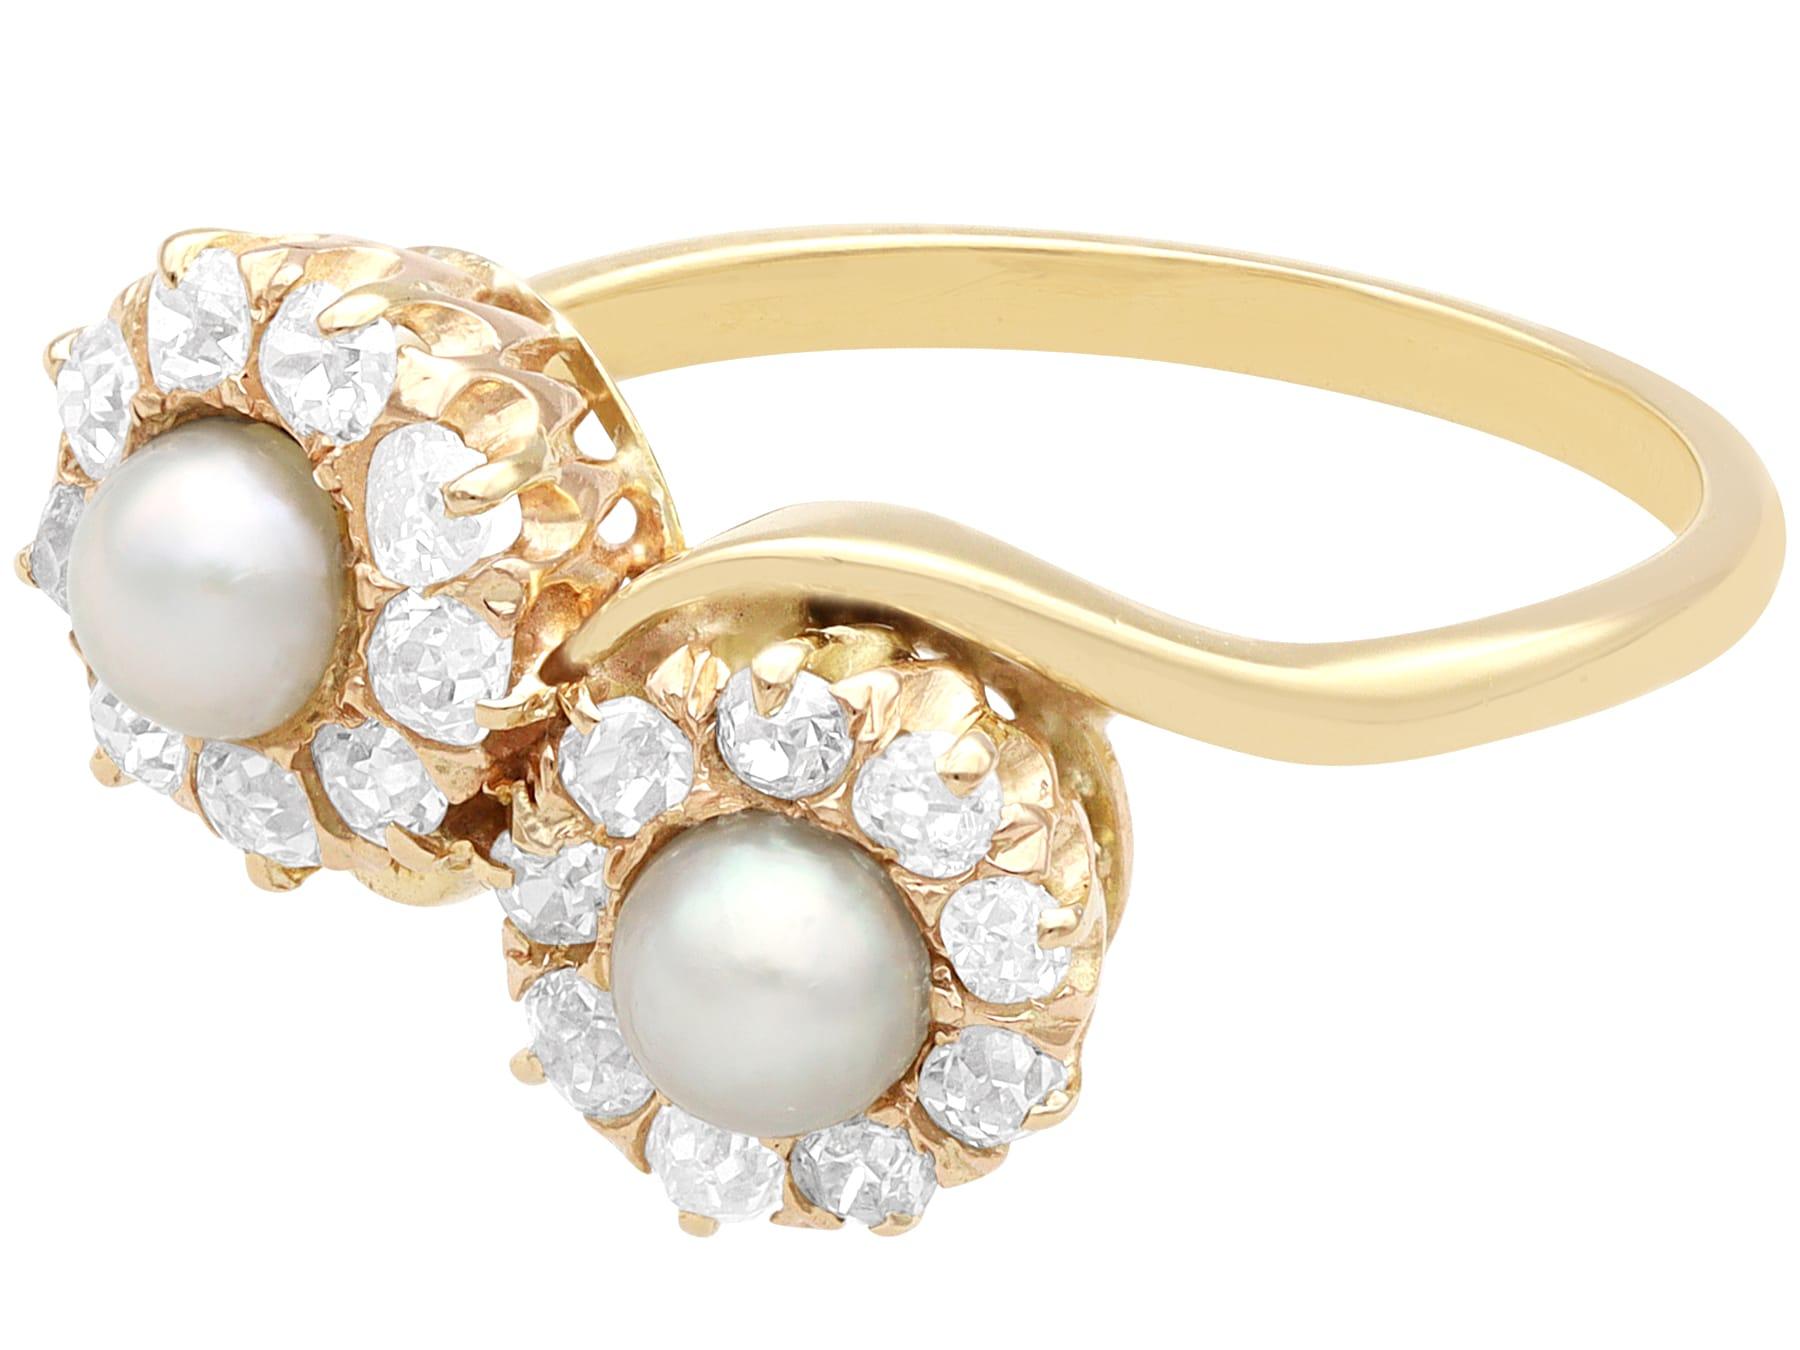 A stunning, fine and impressive 0.97 carat diamond and pearl, 18 karat yellow gold twist ring; part of our antique jewelry collections.

This stunning antique pearl and diamond ring has been crafted in 18k yellow gold.

The pierced decorated design